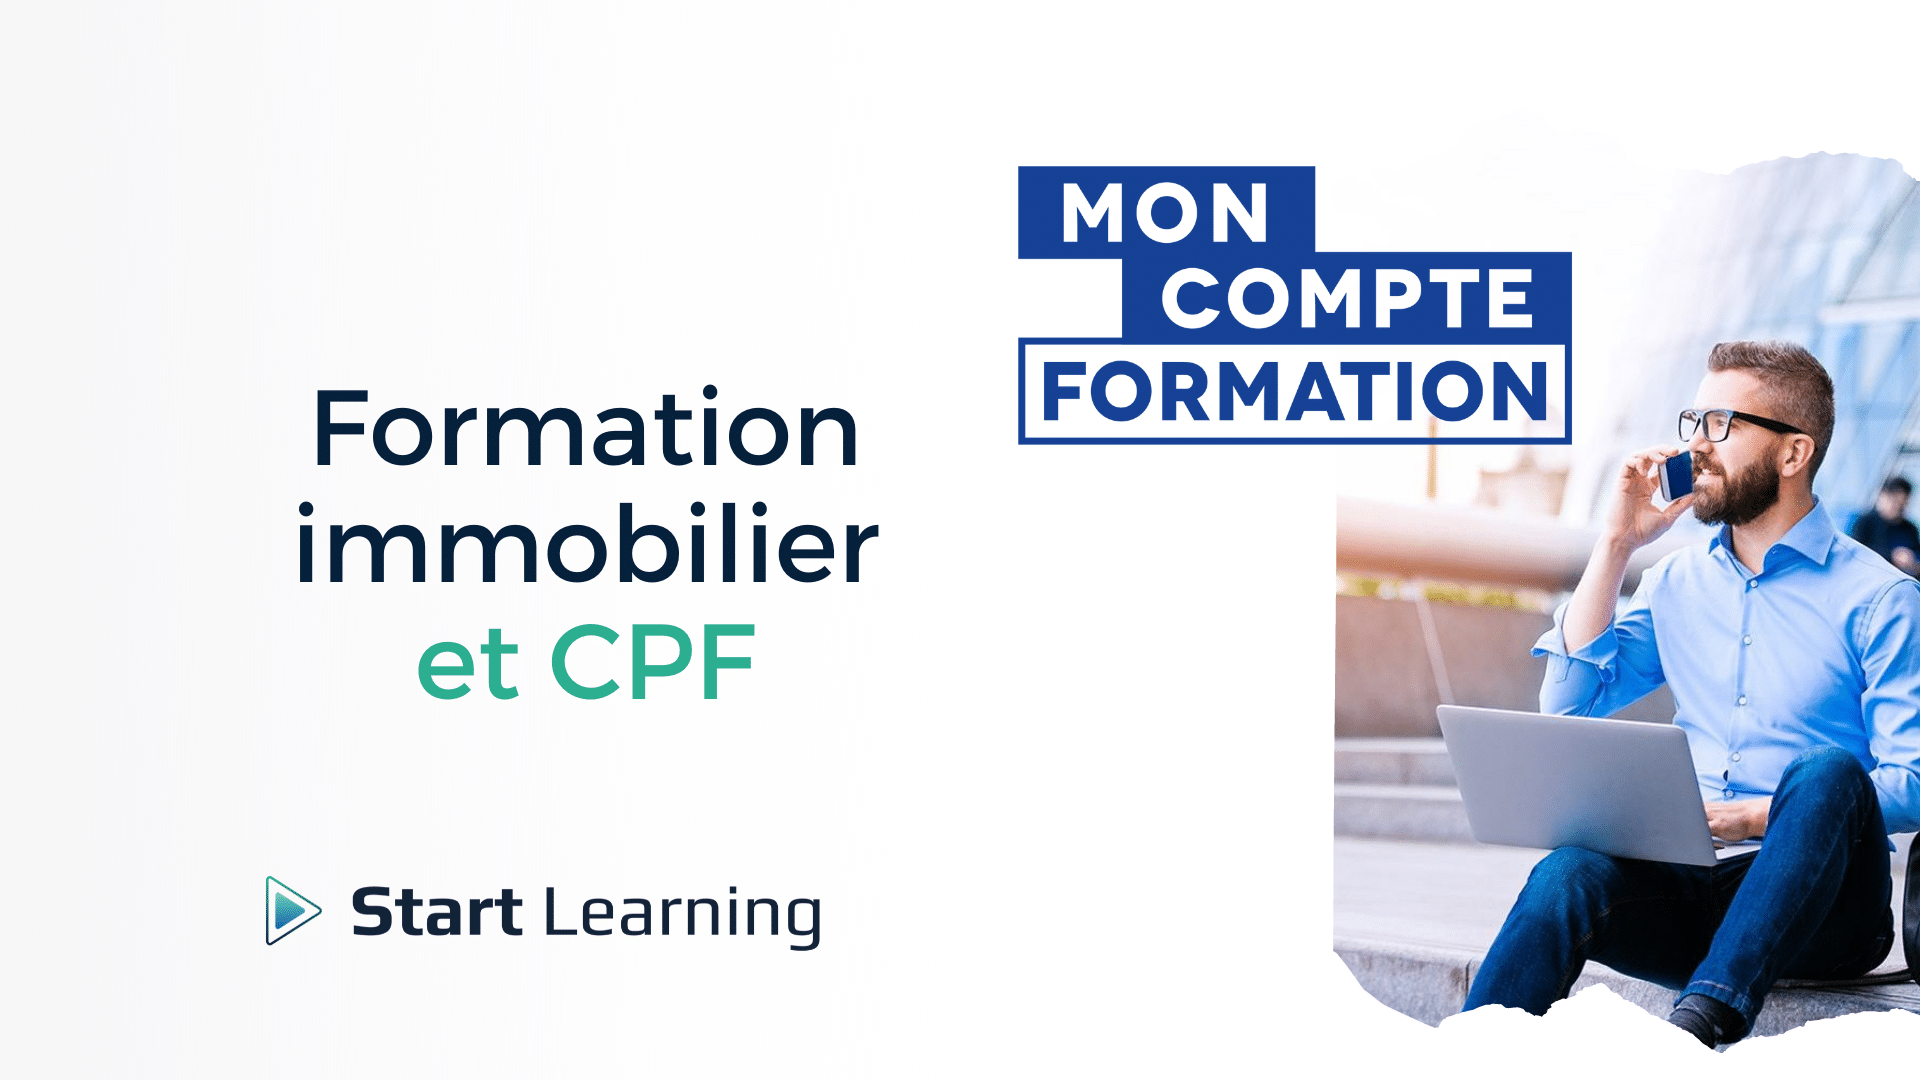 Formation immobilier et CPF - Start Learning